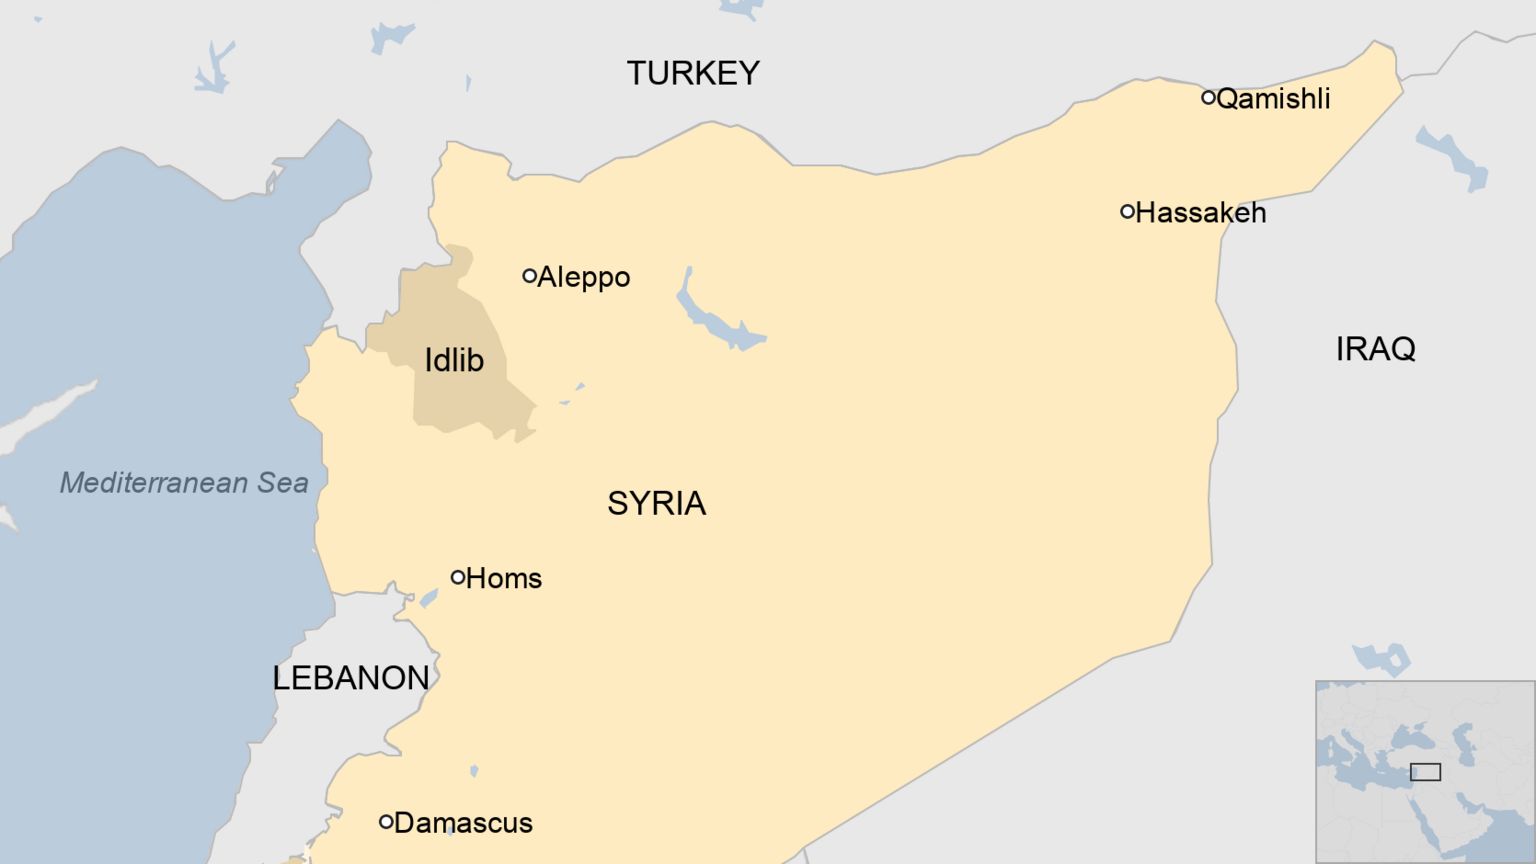 Map of Syria showing Homs (in the west) and Idlib (in the north-west)